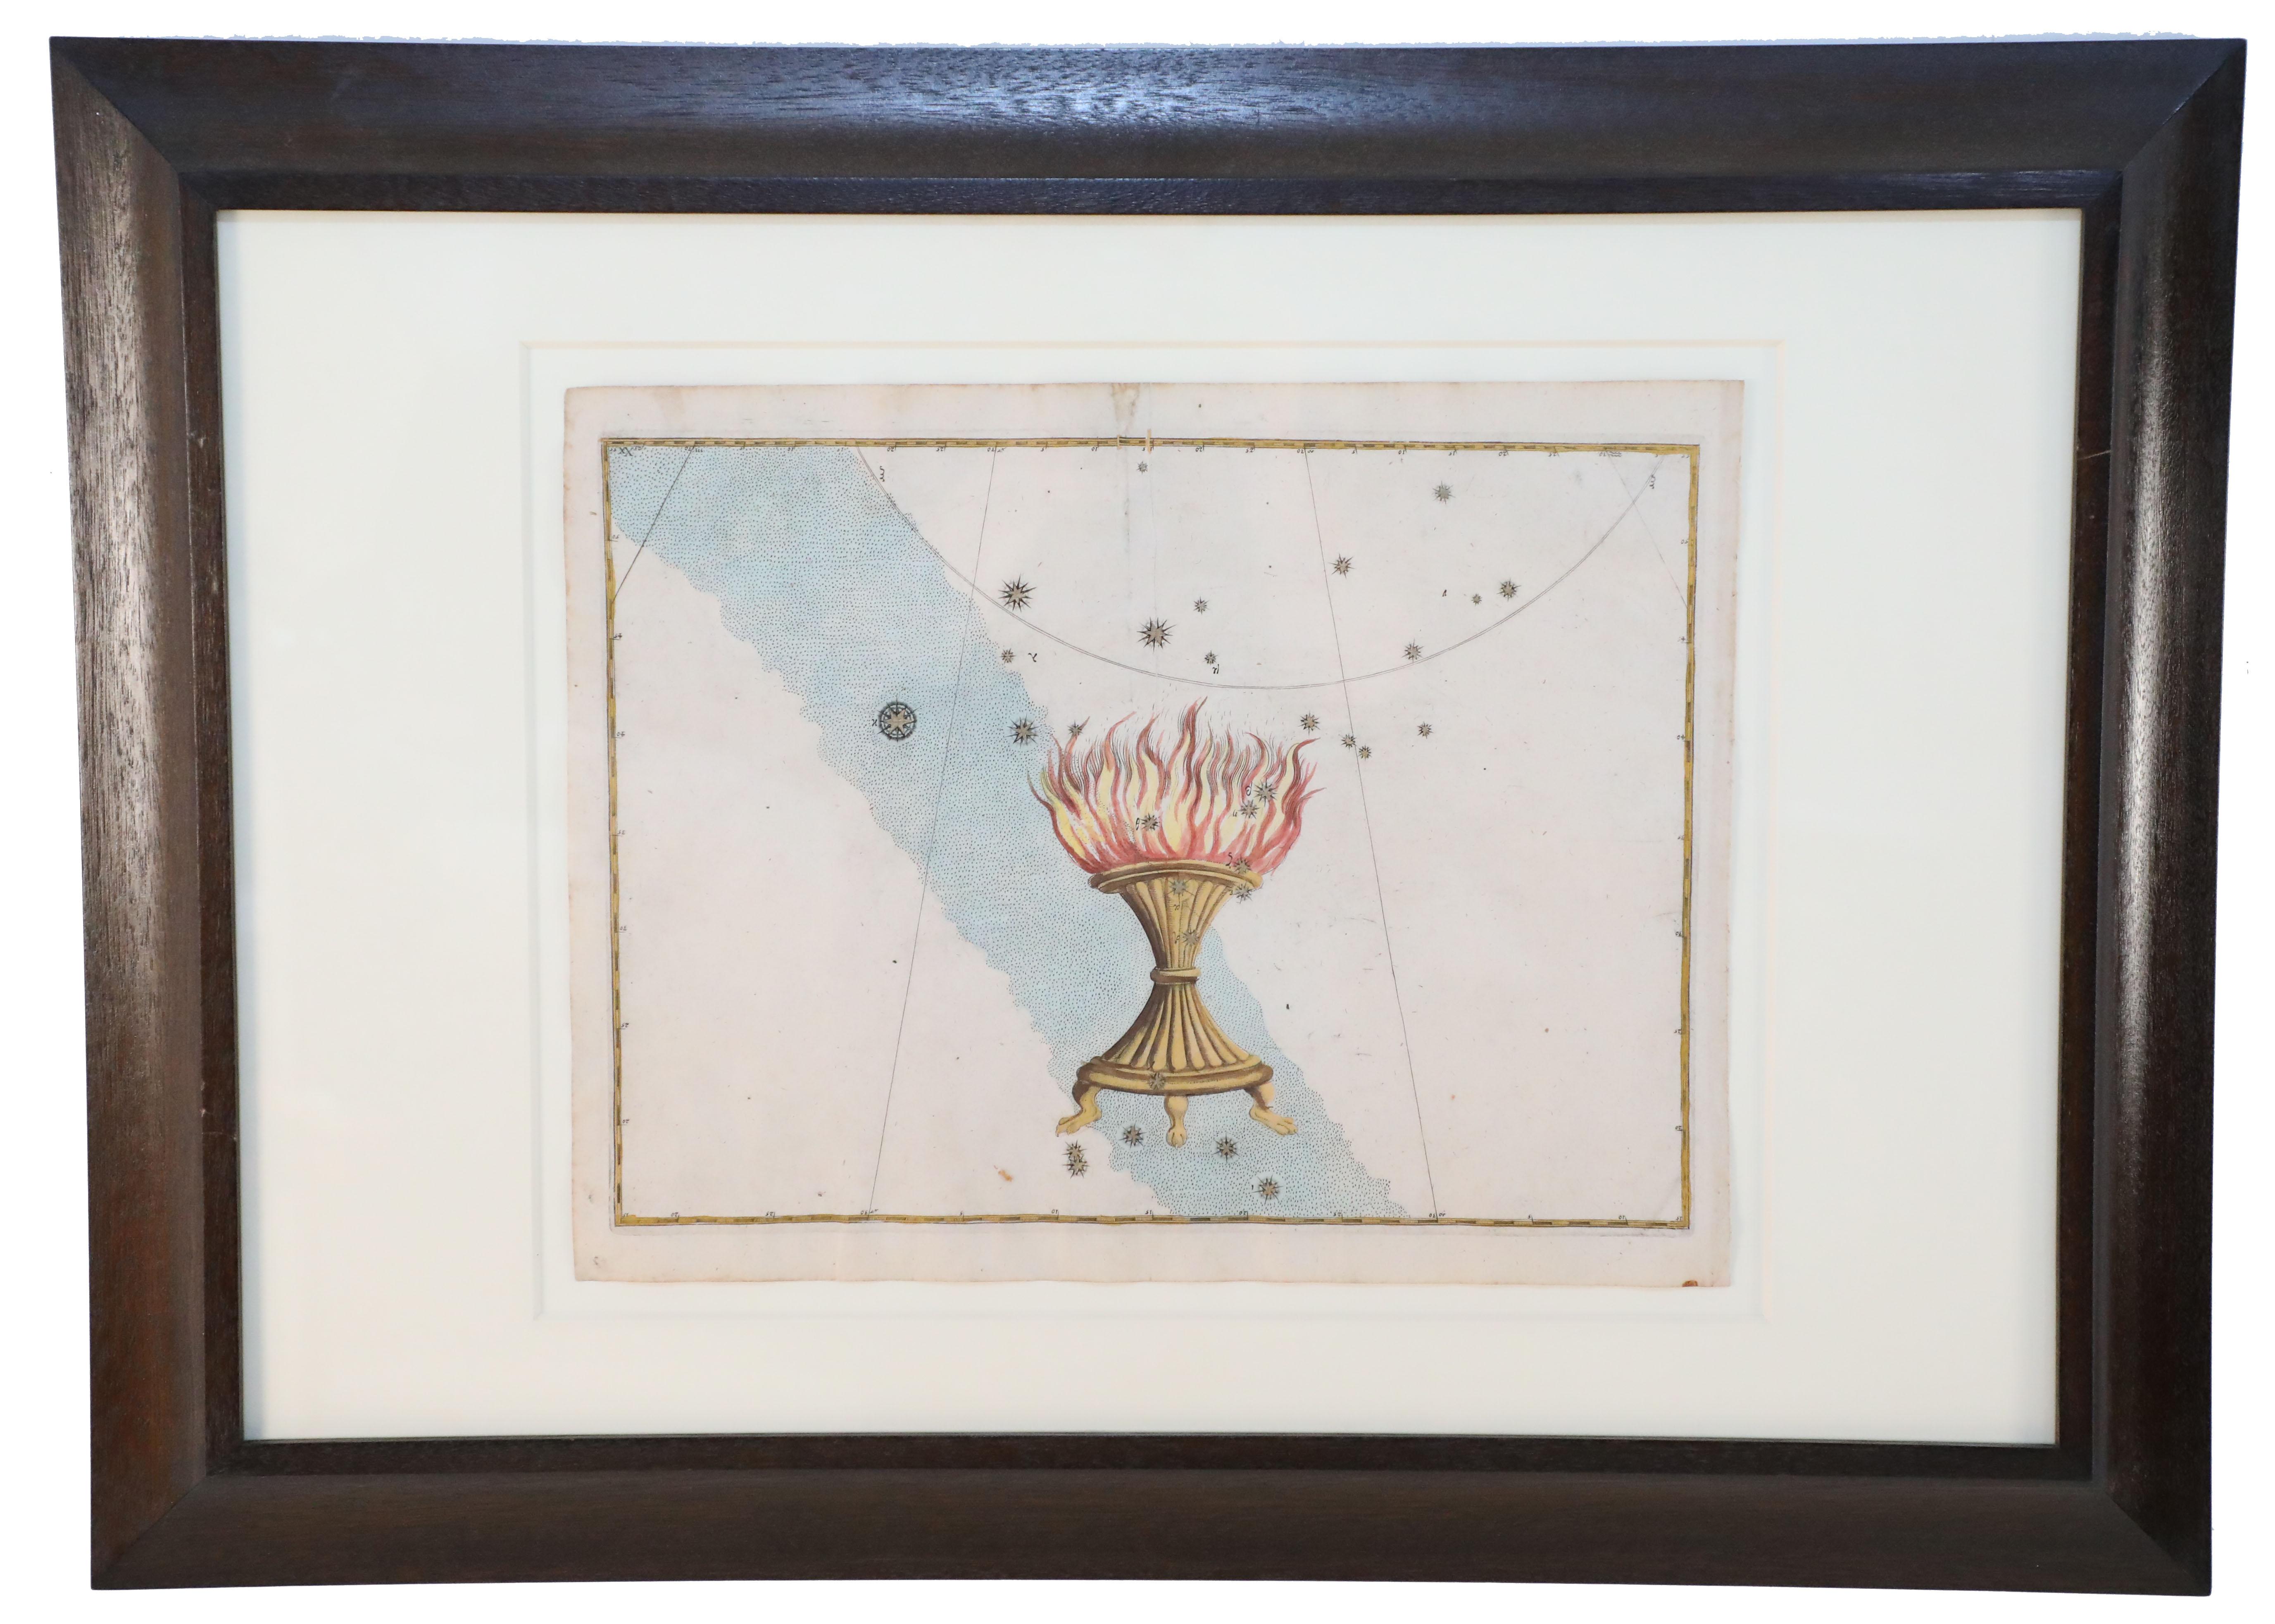 Alexander Mair Renaissance Hand-Colored Engravings of Astronomy Star Charts For Sale 1